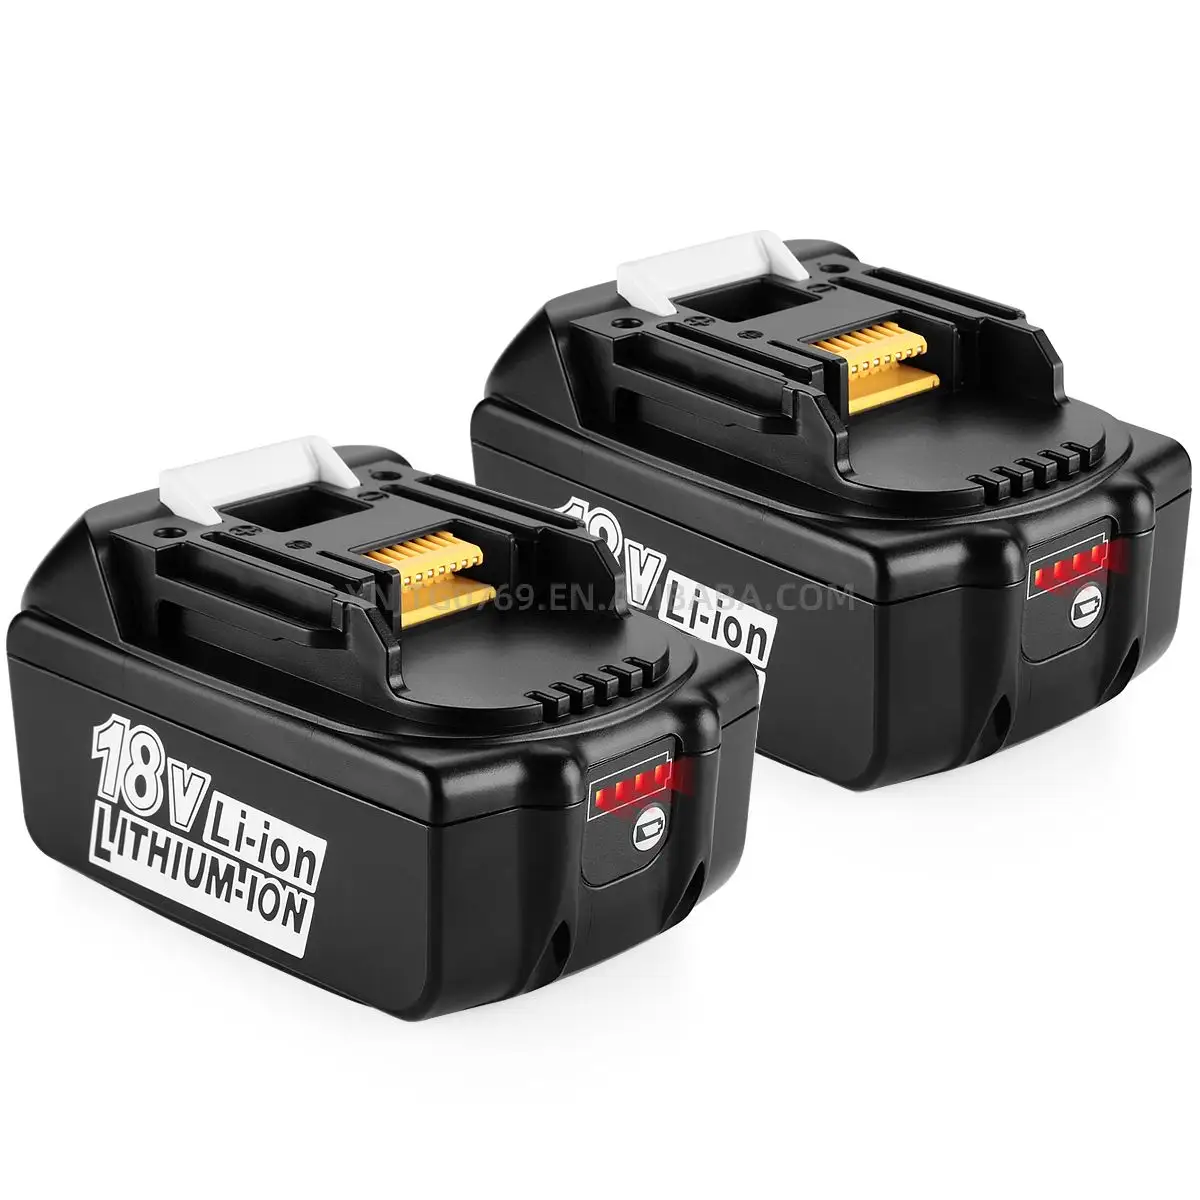 HOT replacement batteries for makita 18V power tool battery 6Ah BL1860 BL1830 BL1850 battery